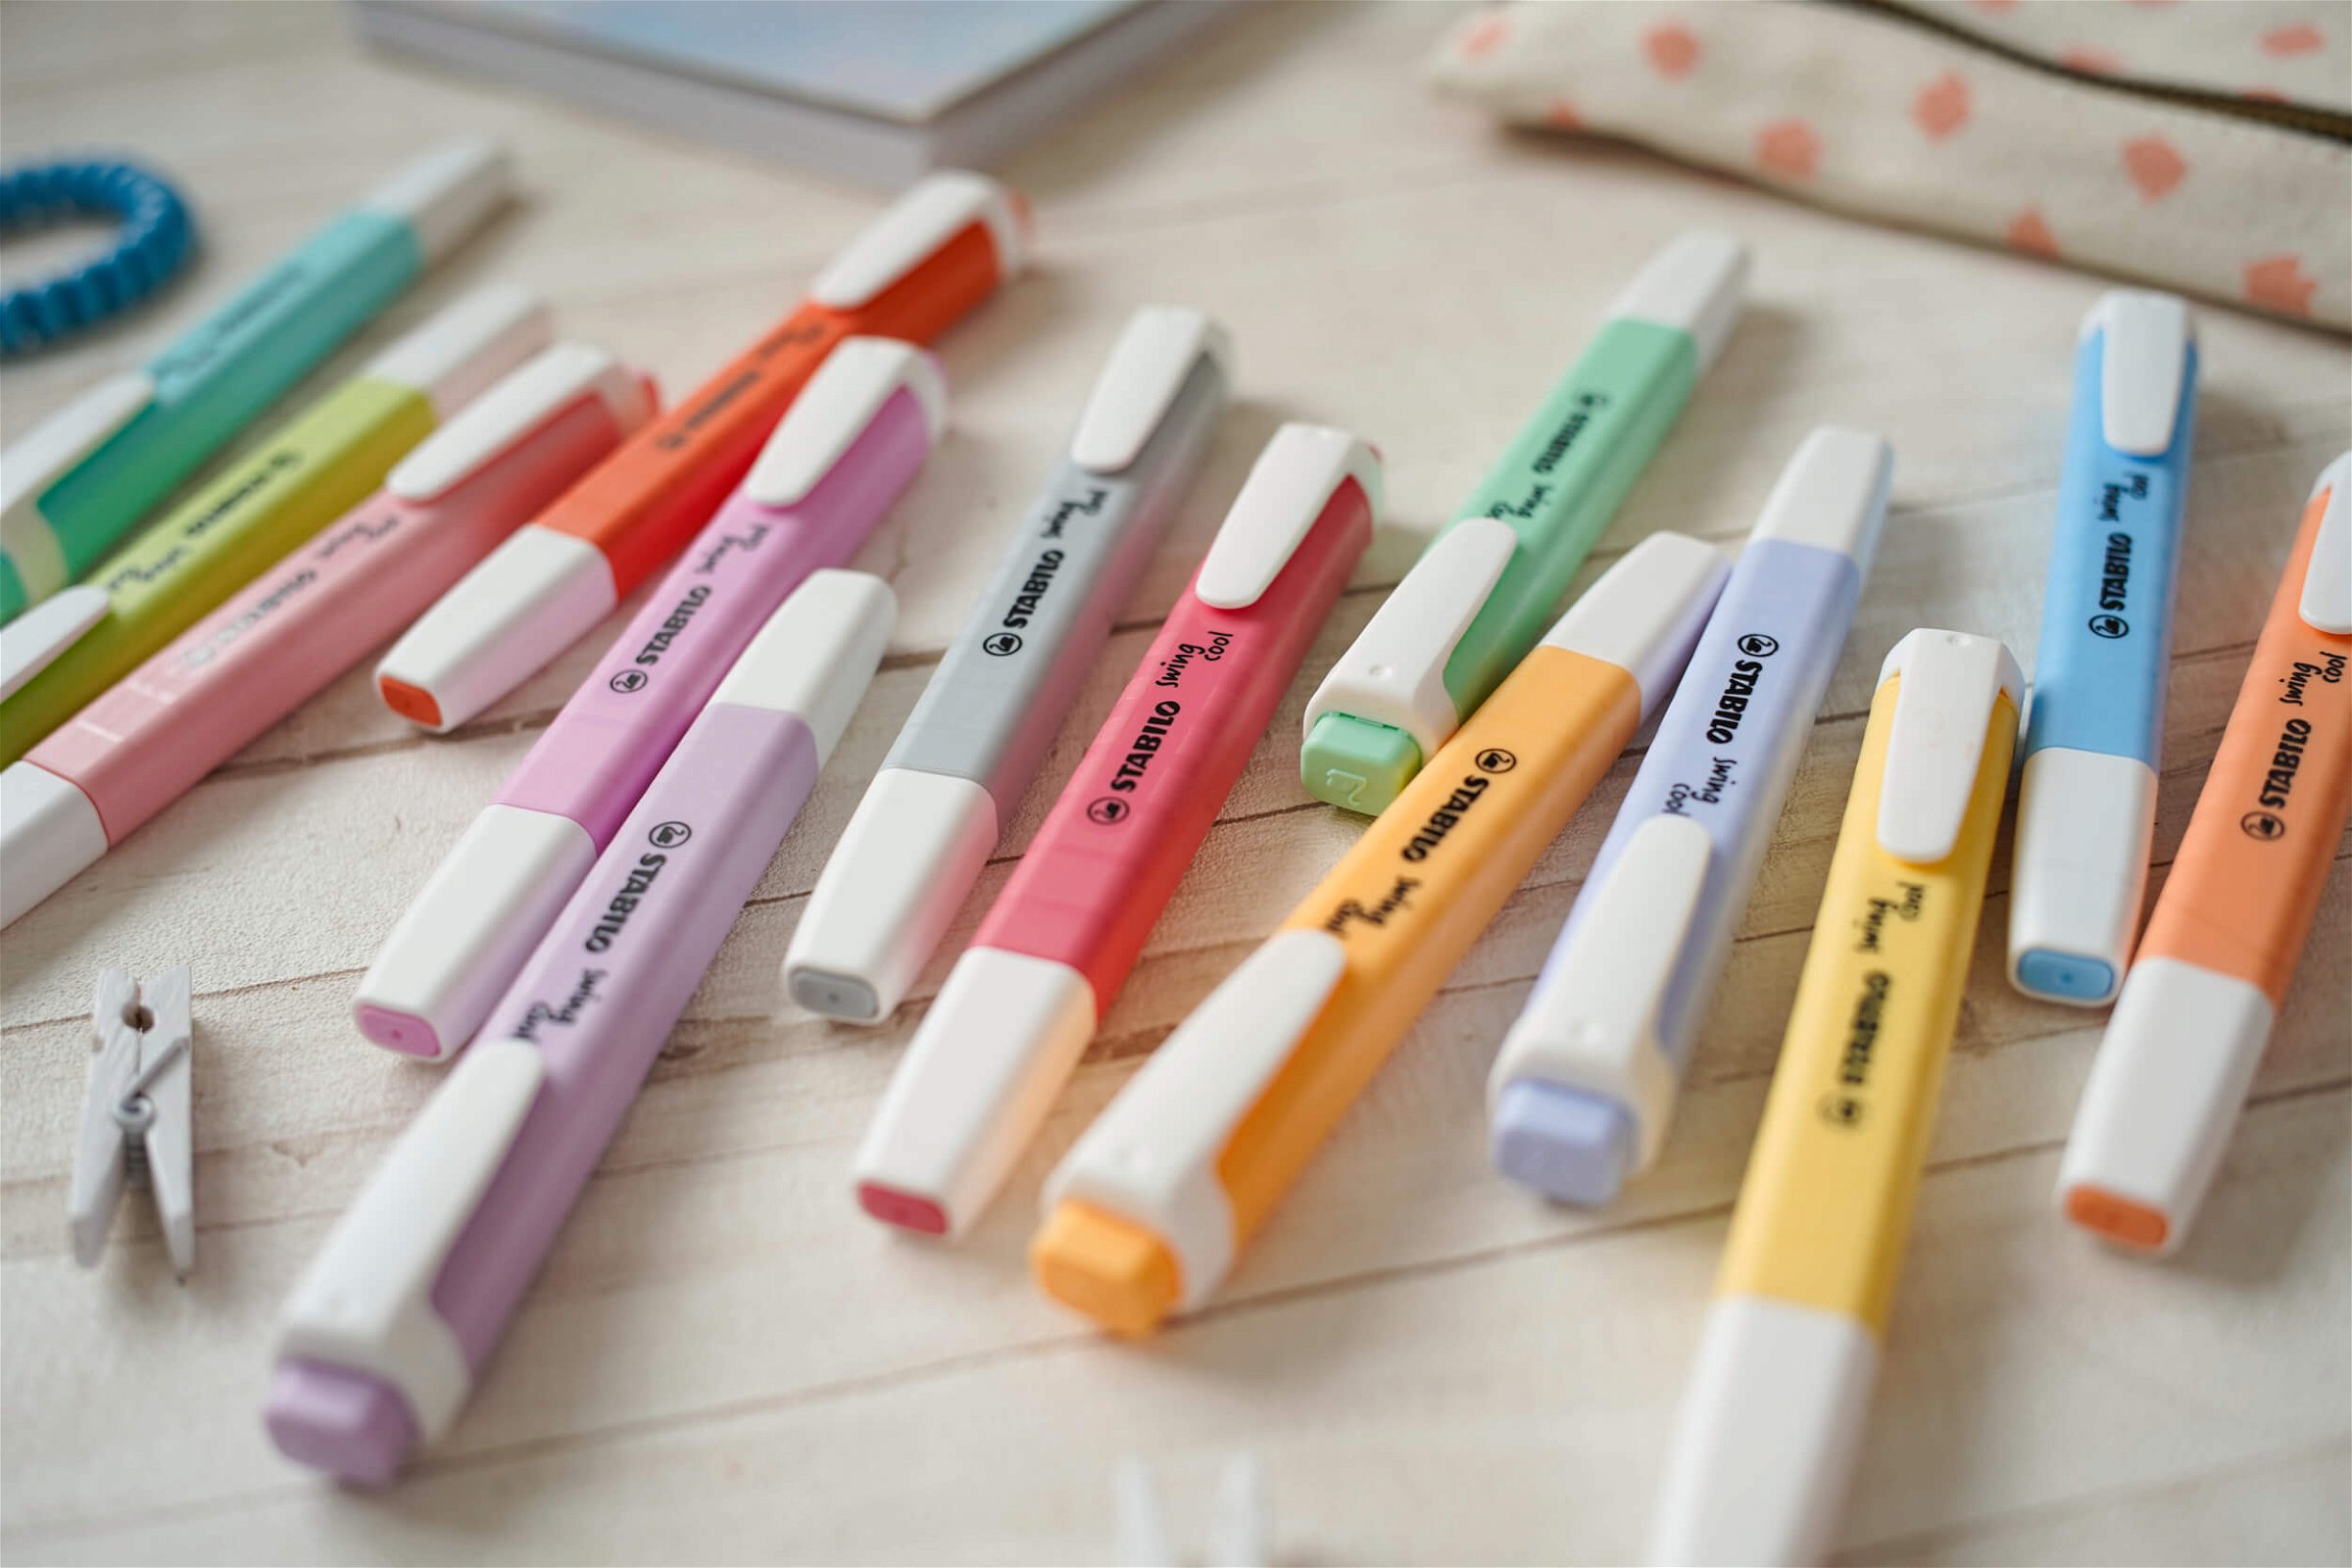 All STABILO pastel highlighters